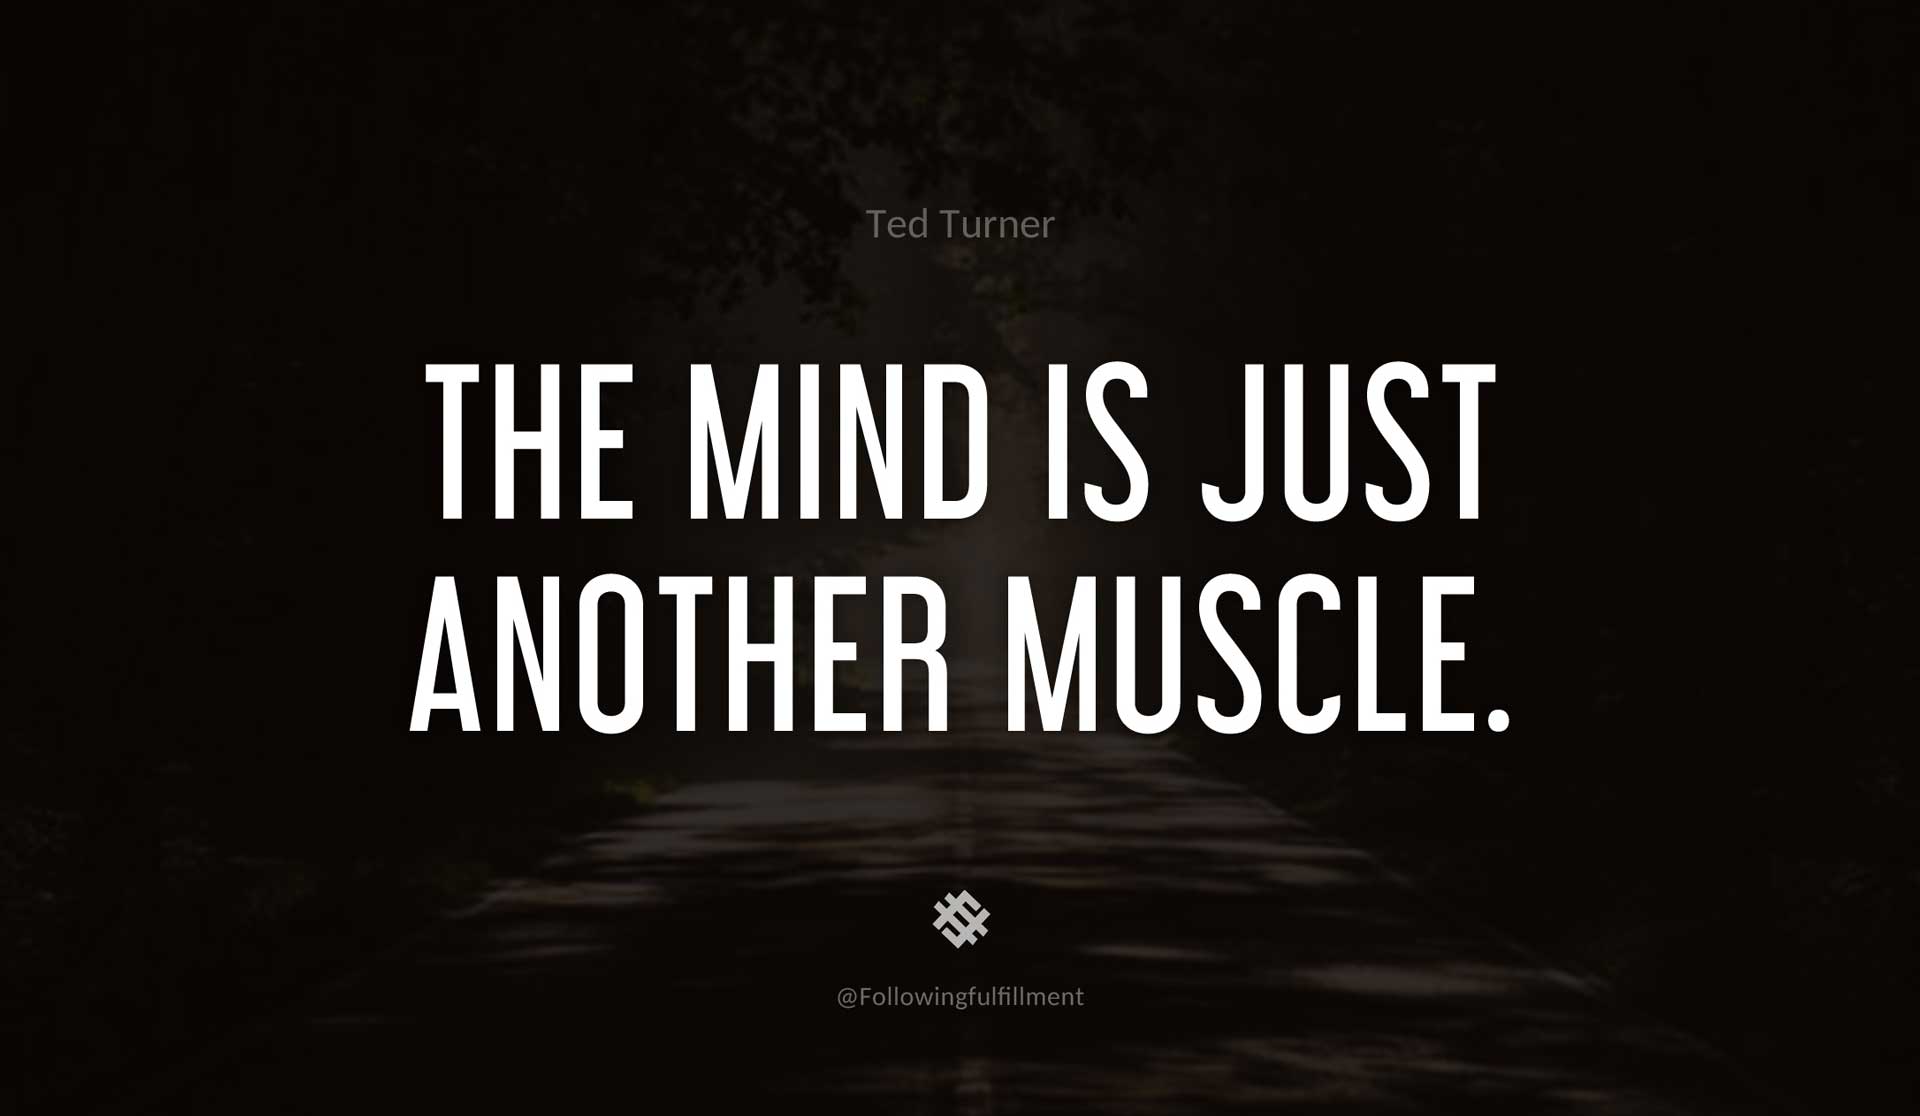 The-mind-is-just-another-muscle.-TED-TURNER-Quote.jpg